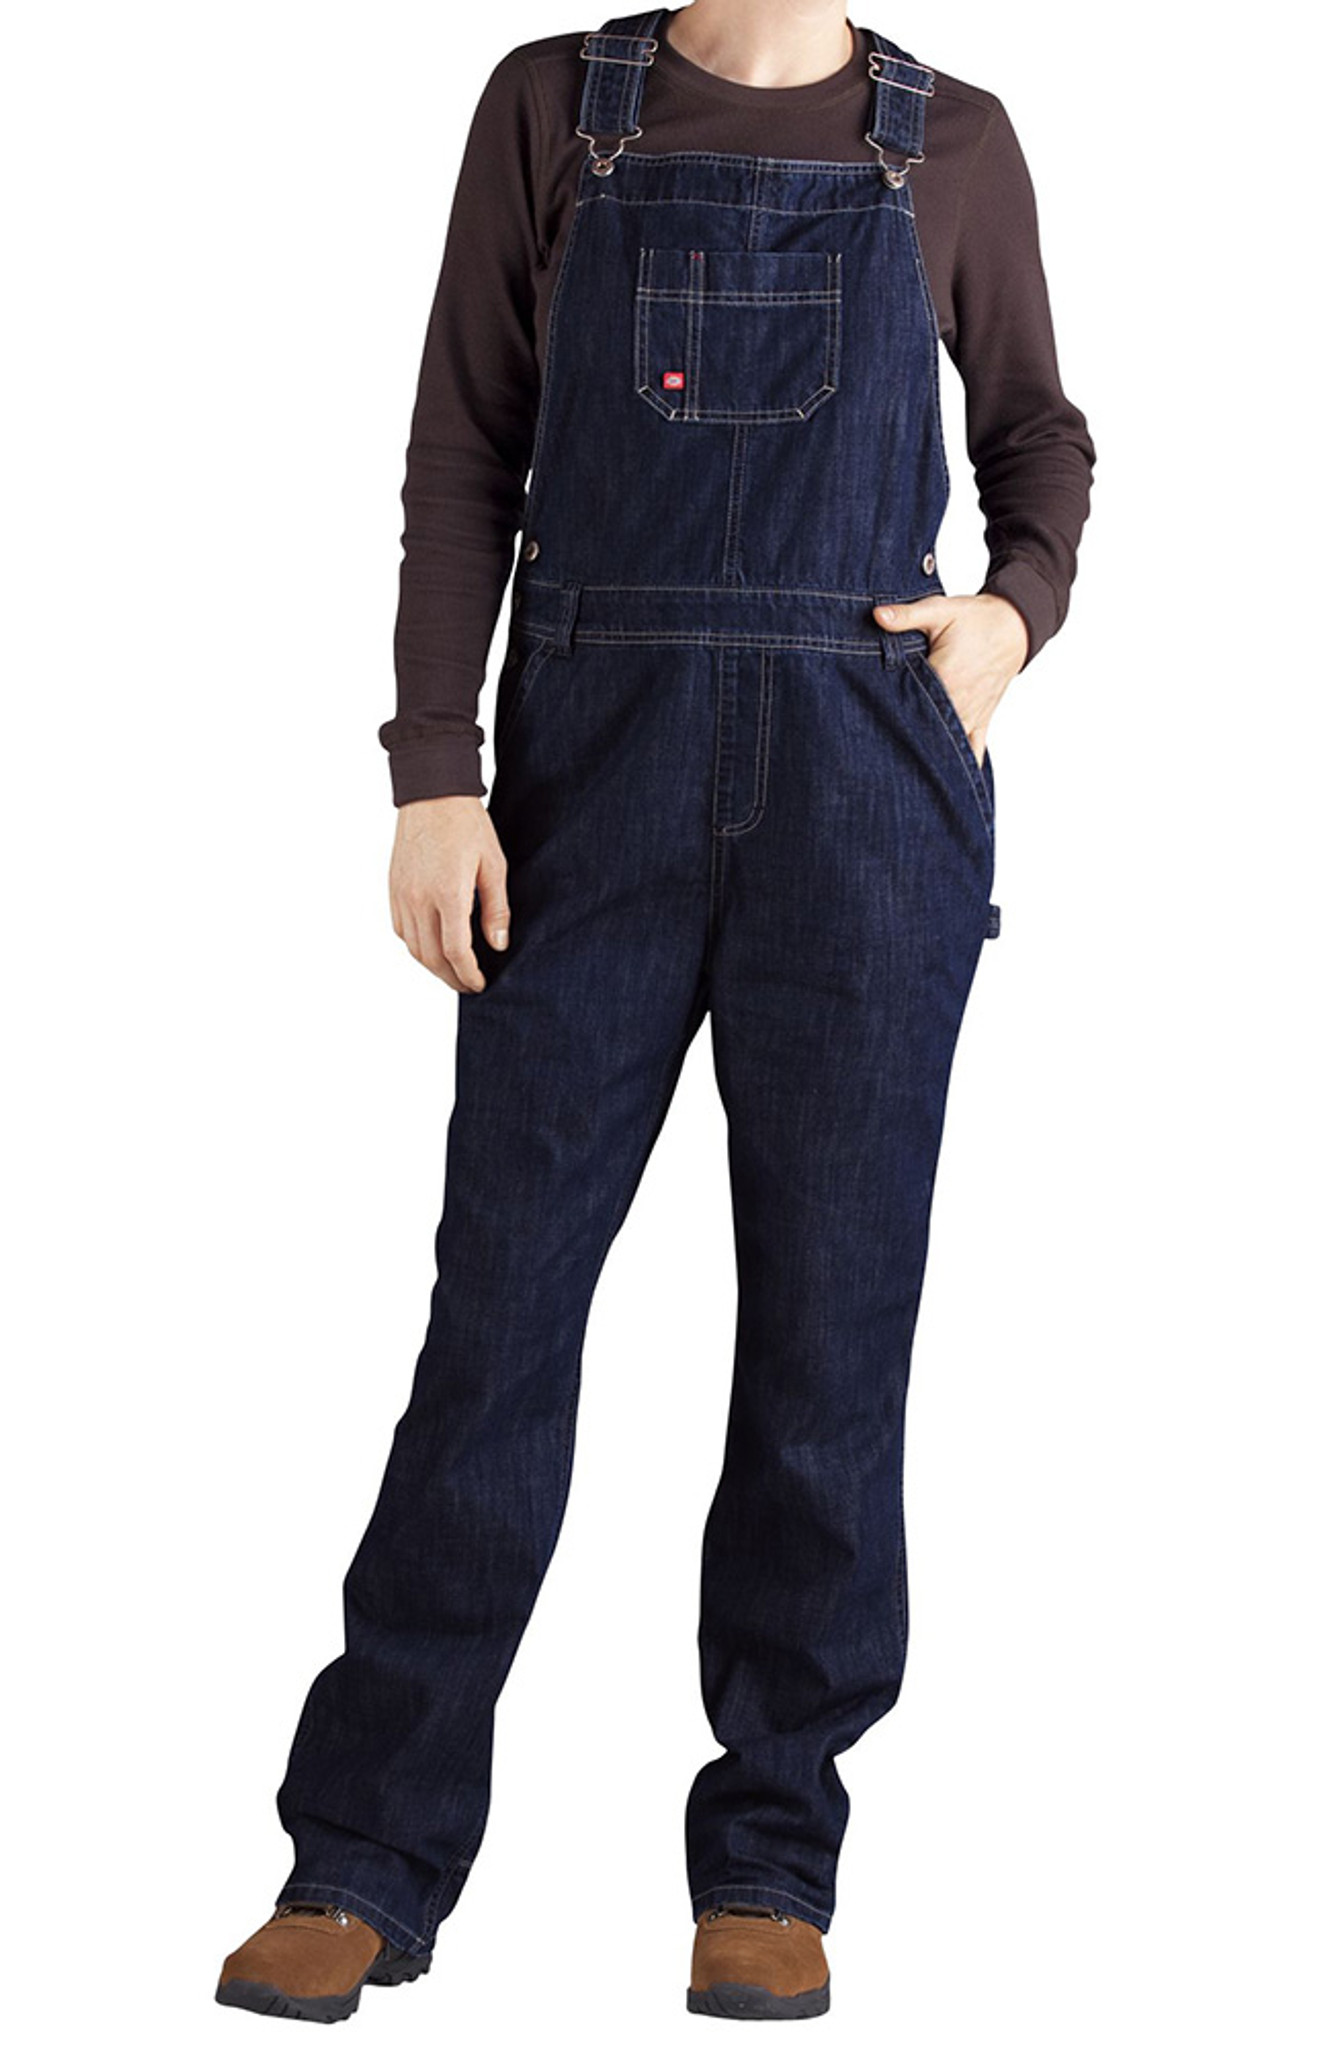 LEE 101 RELAXED FIT BIB OVERALL IN DRY INDIGO